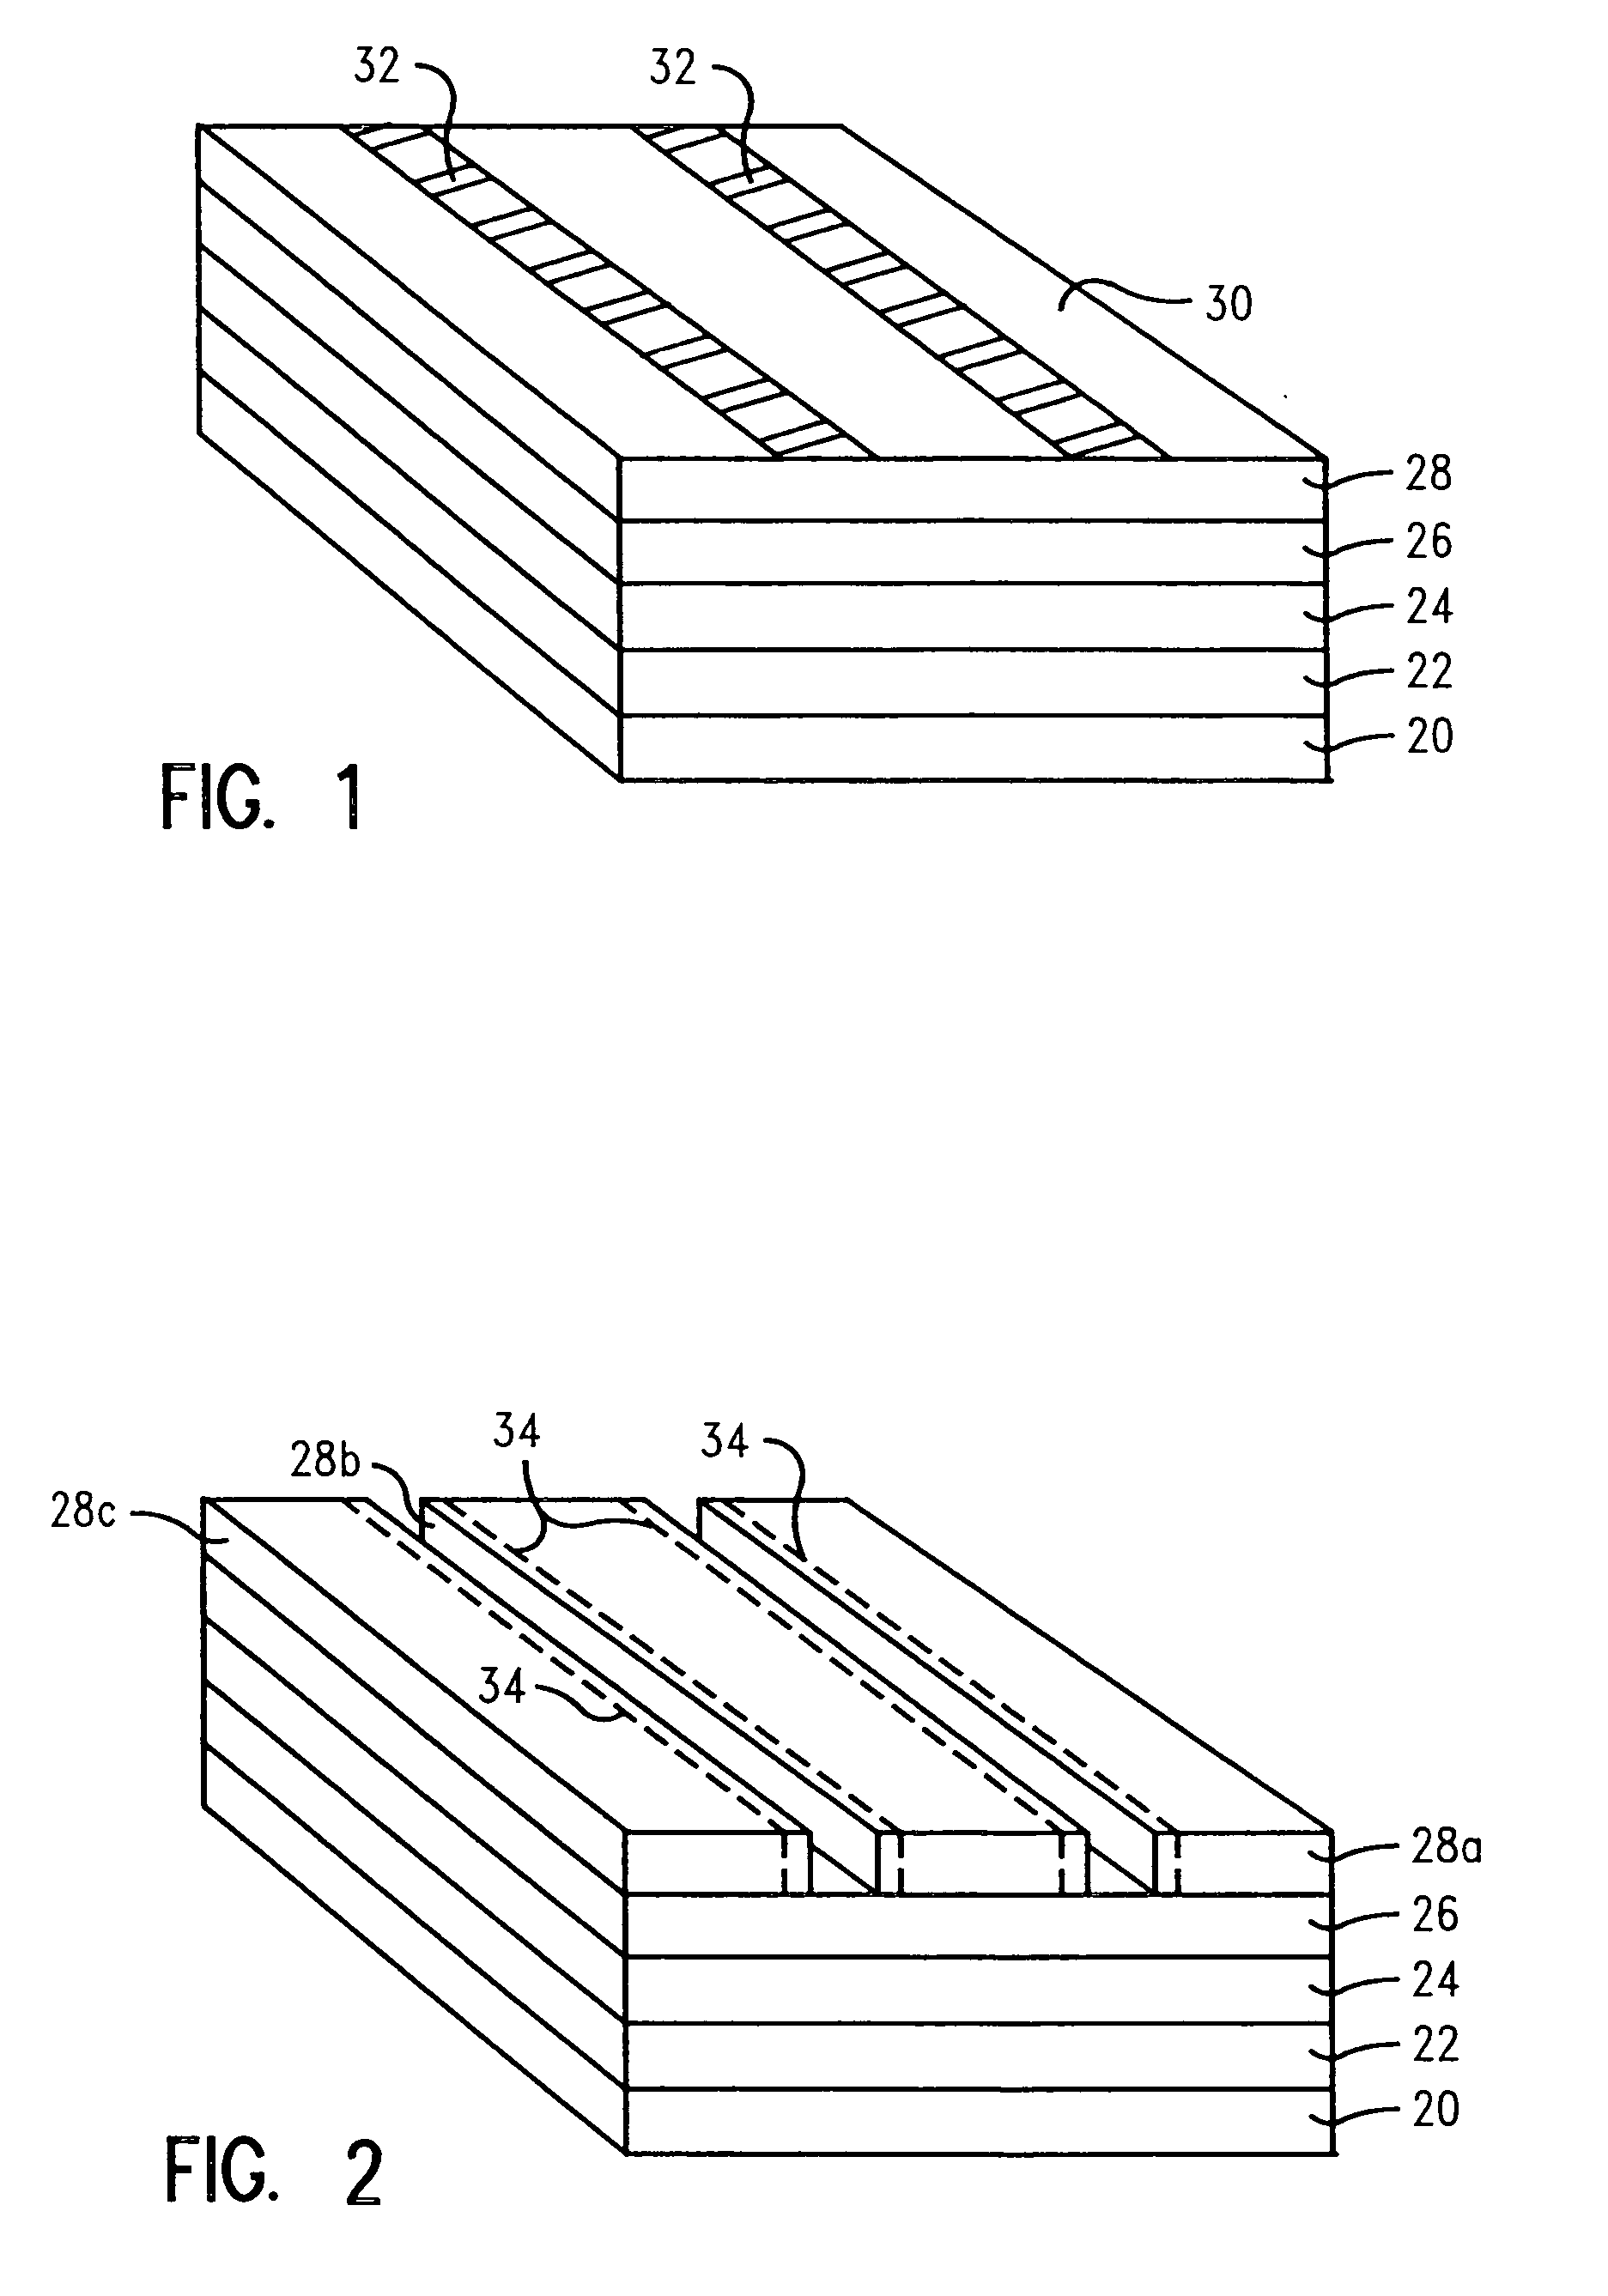 Method for reducing feature line edge roughness